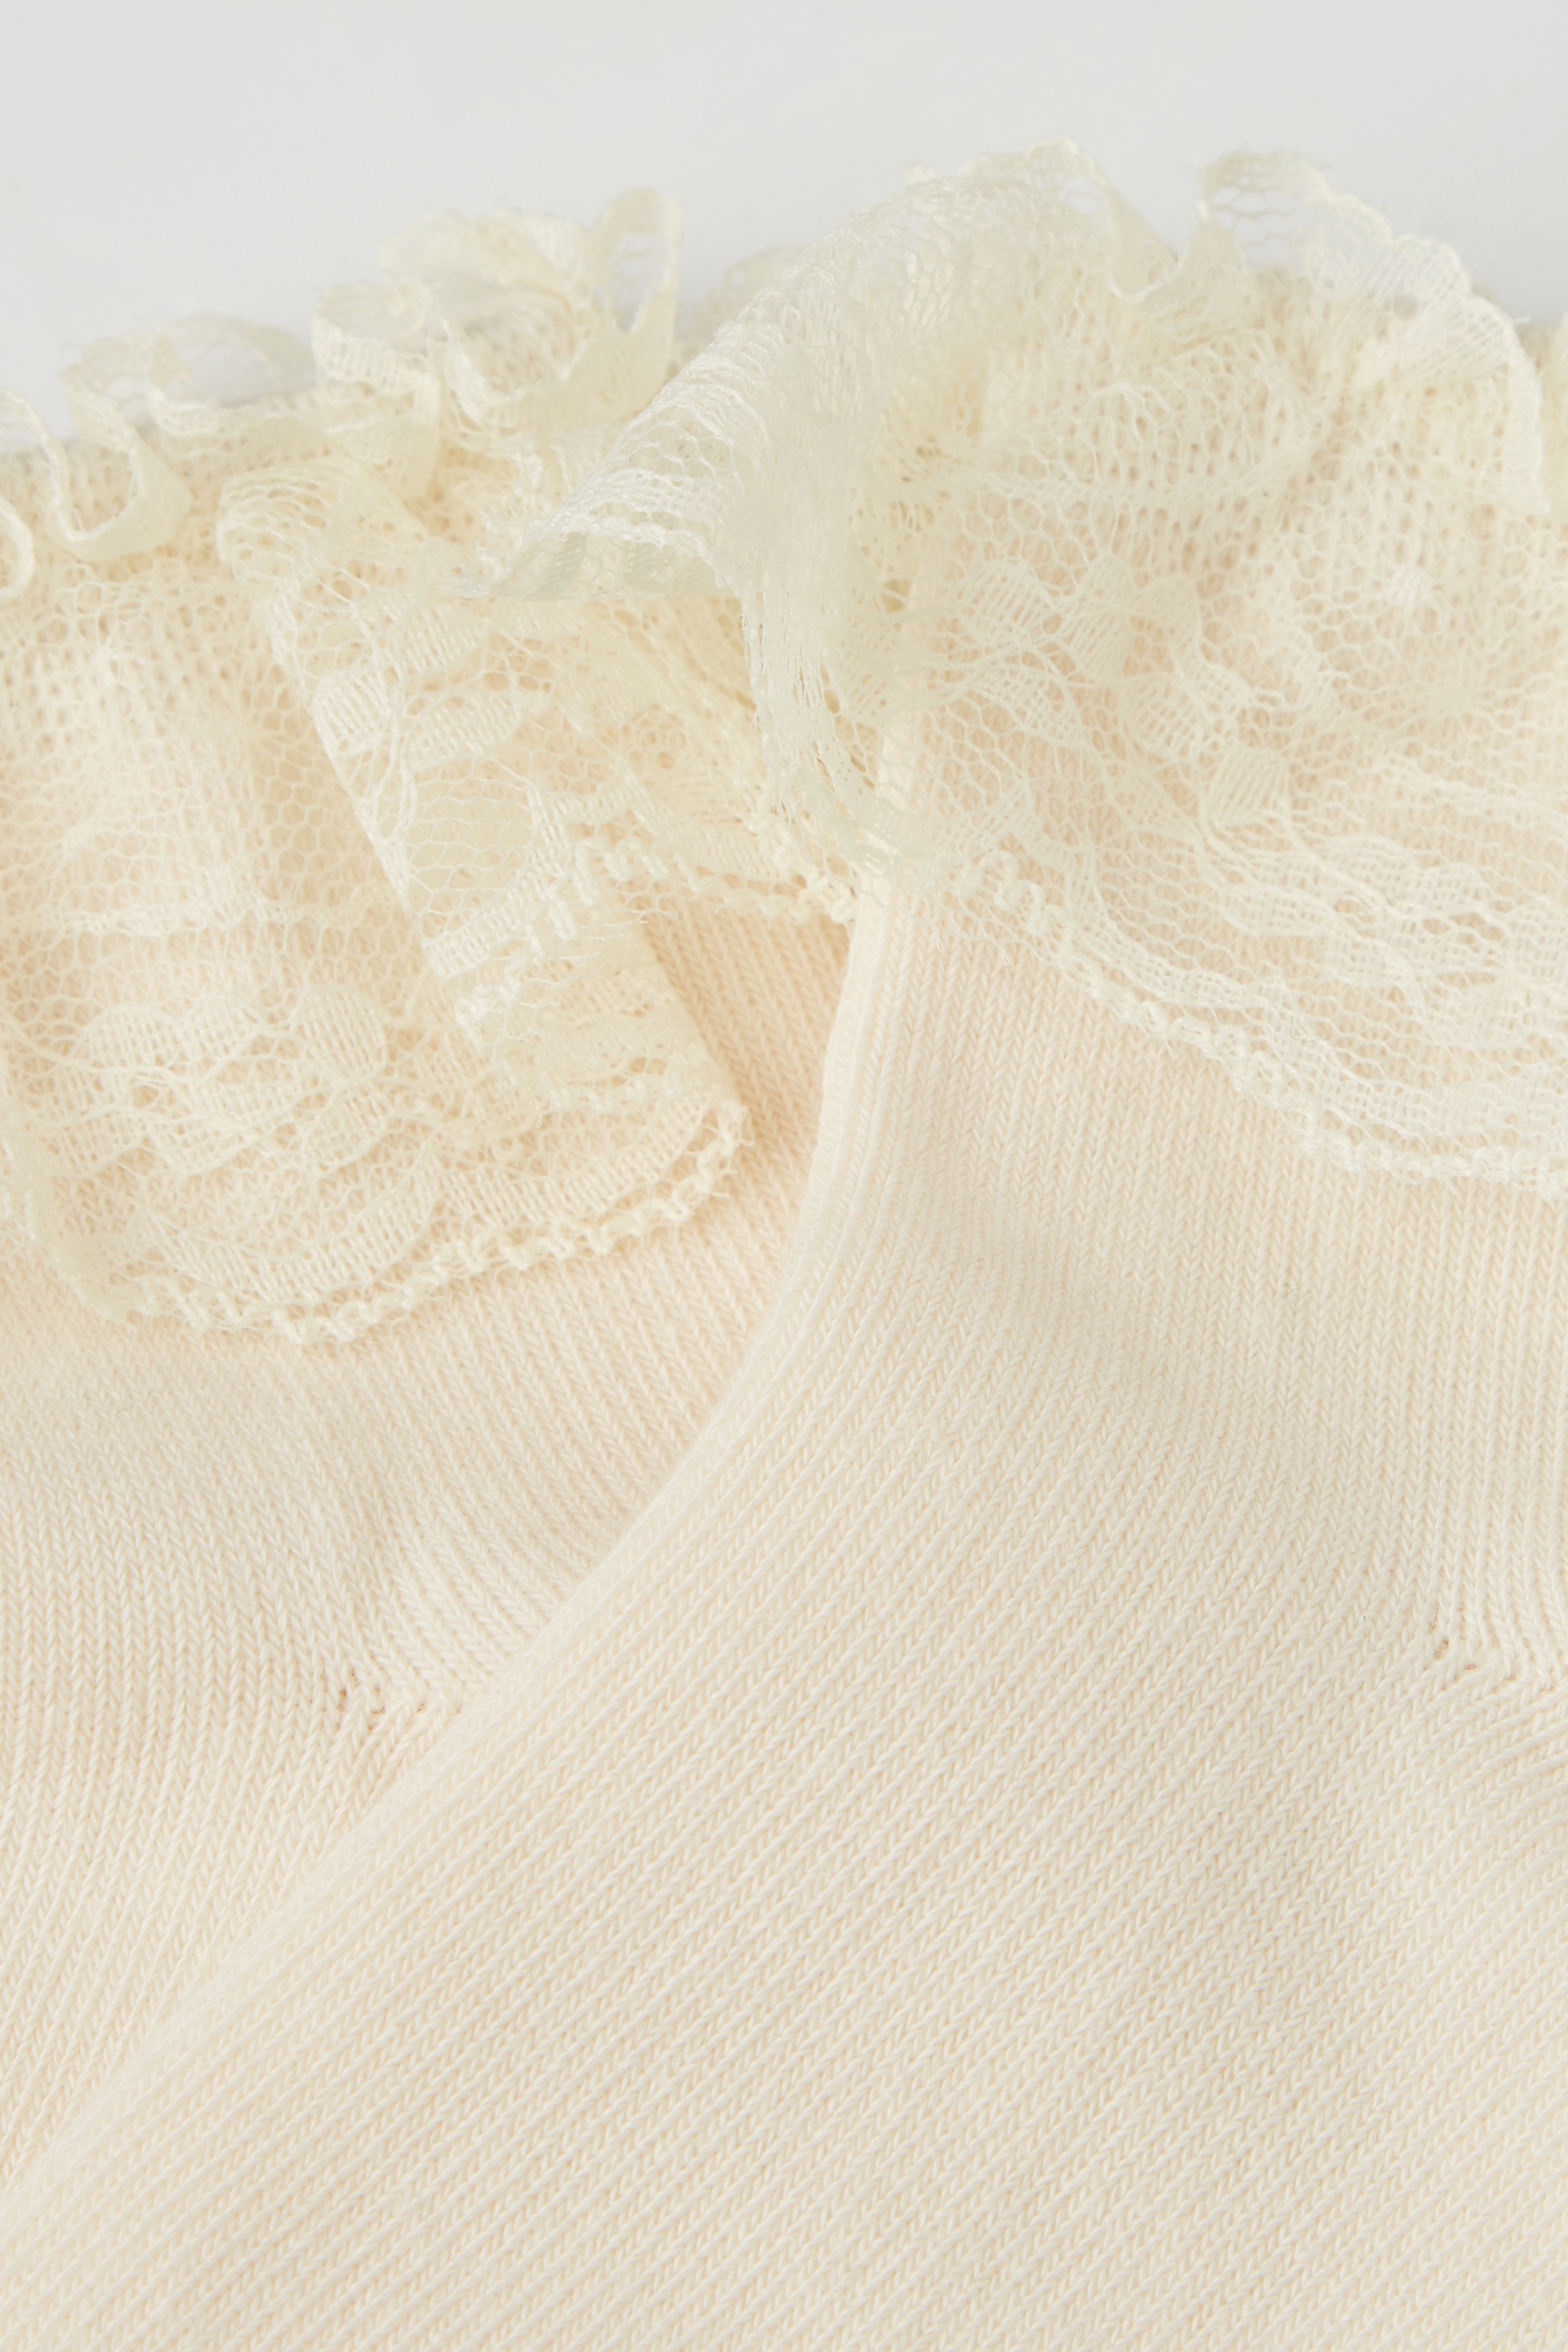 Girls’ Cotton and Lace Short Socks